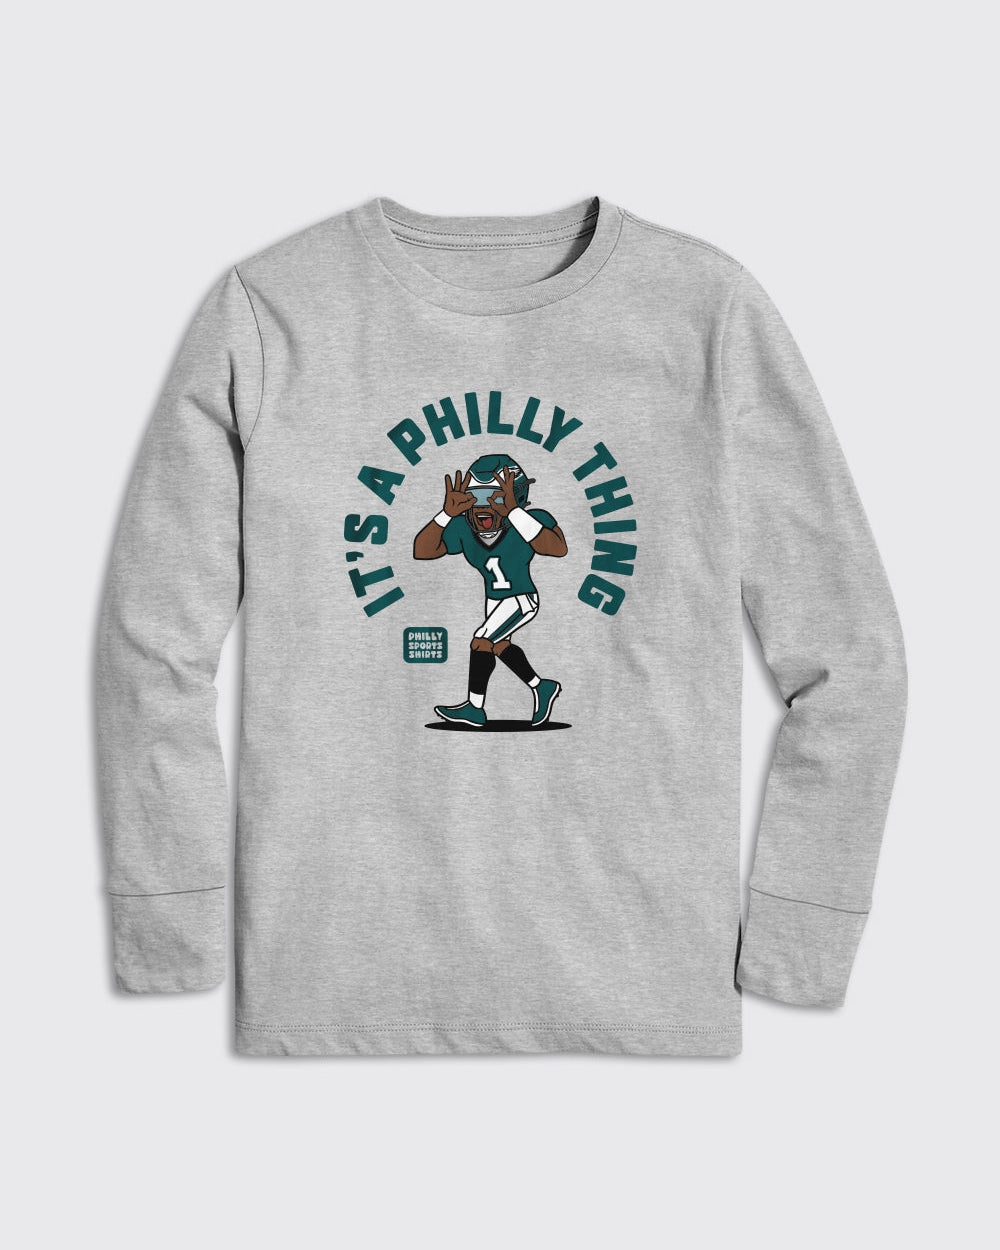 Kids It's A Philly Thing Long Sleeve - Eagles, Kids, Long Sleeve - Philly Sports Shirts